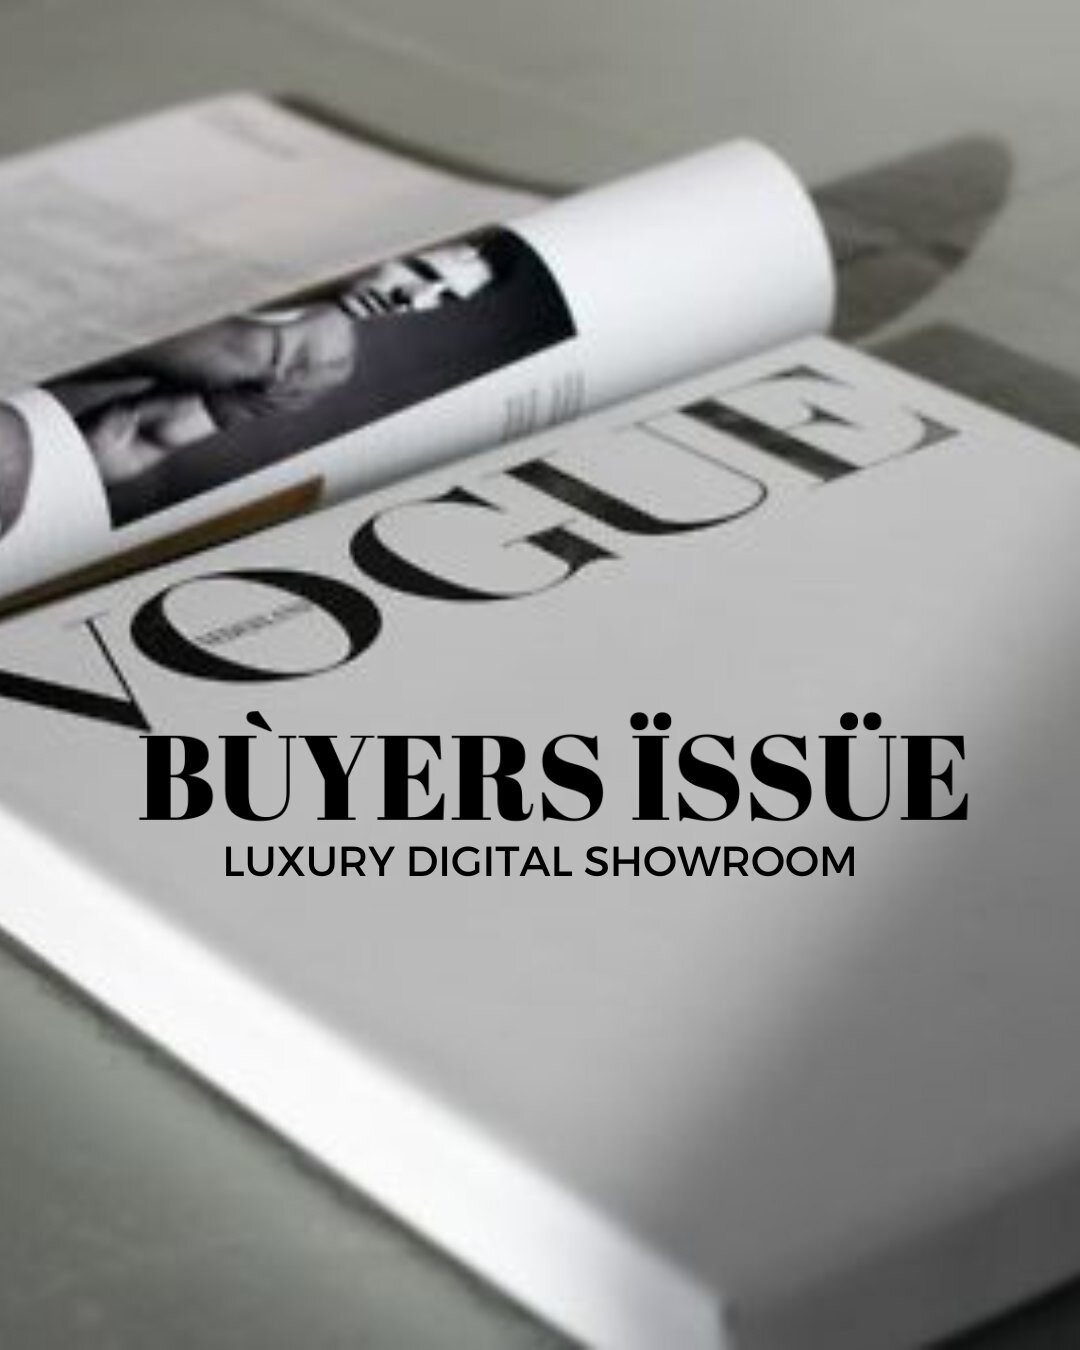 Our luxury digital showroom offers Client Exclusive 6 or 12 month memberships to only 20 brands at a time to preserve exclusivity. To become a Client Exclusive you must apply, and only approved brands can purchase memberships and become part of our e